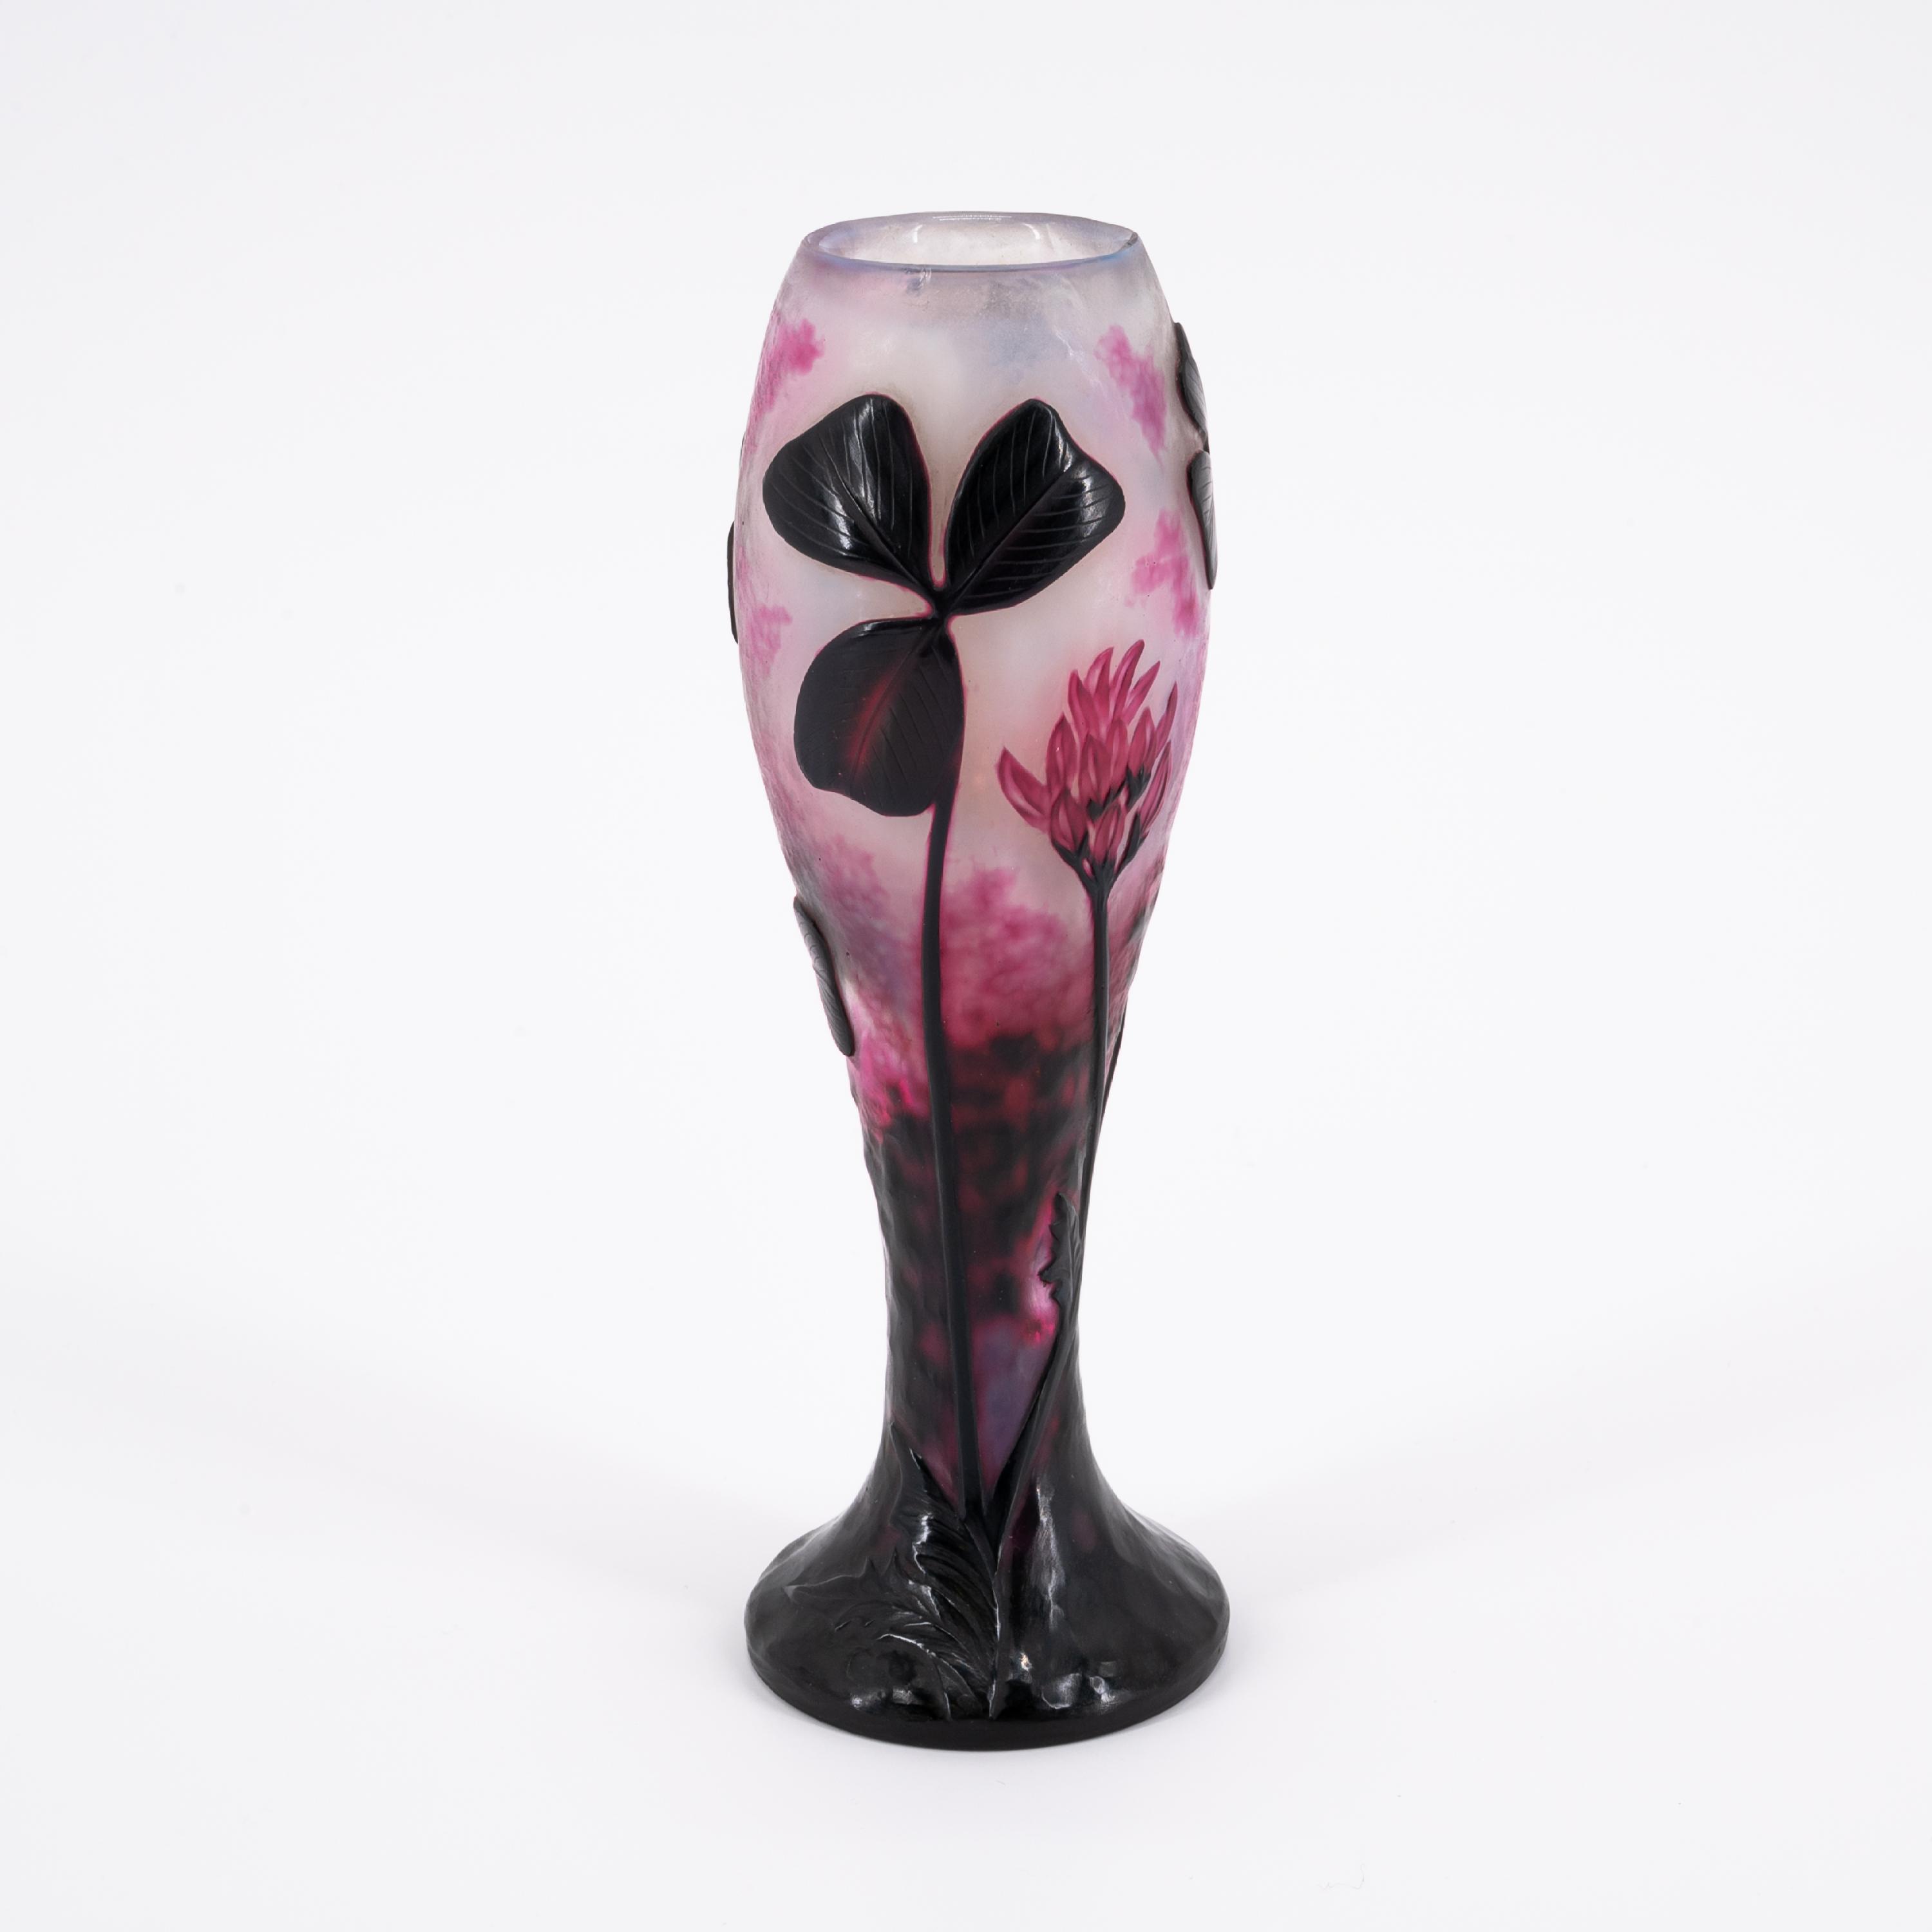 CLUB-SHAPED GLASS VASE WITH GINKO BRANCHES - Image 4 of 6